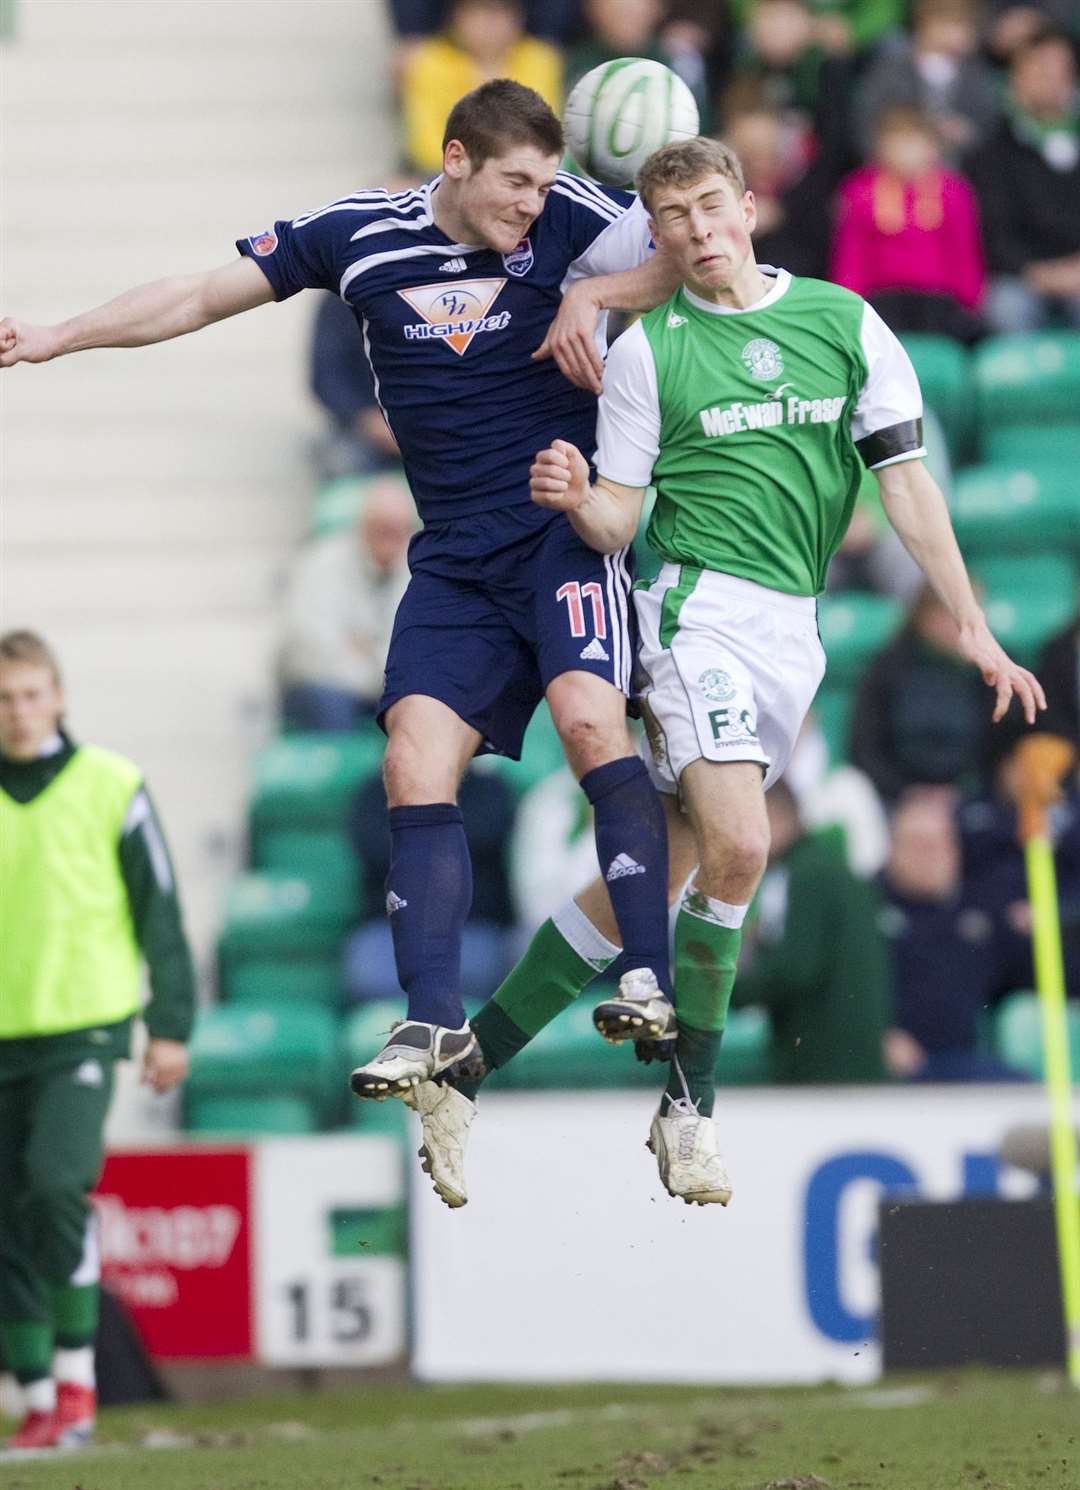 Ross County's Iain Vigurs wins a high ball from Hibs' David Wotherspoon in 2010